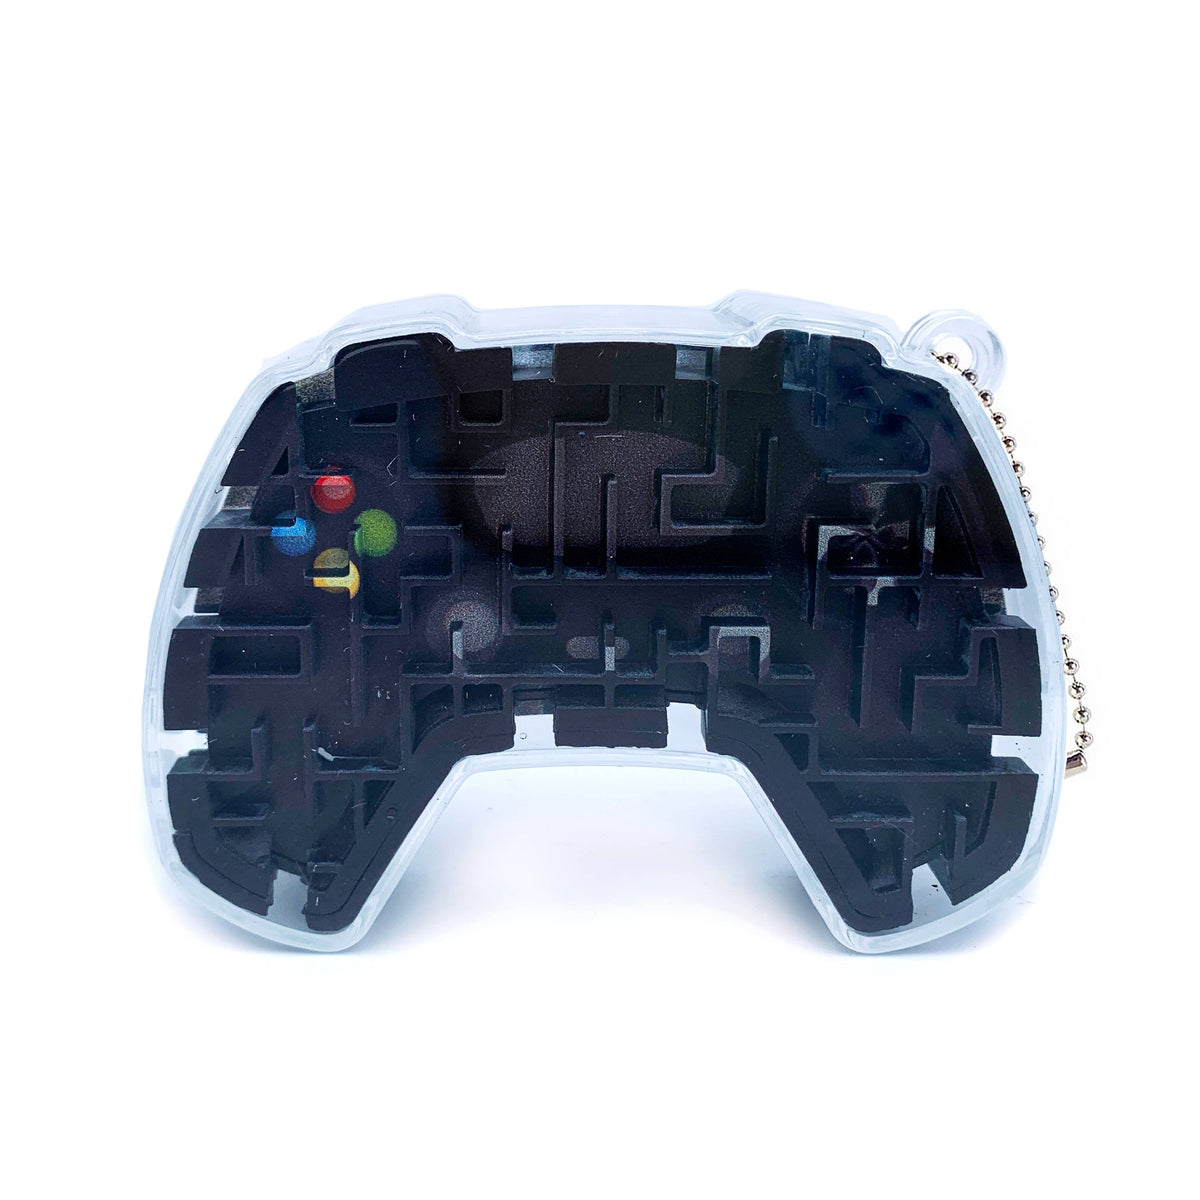 Black 3d maze in the shape of a video game controller